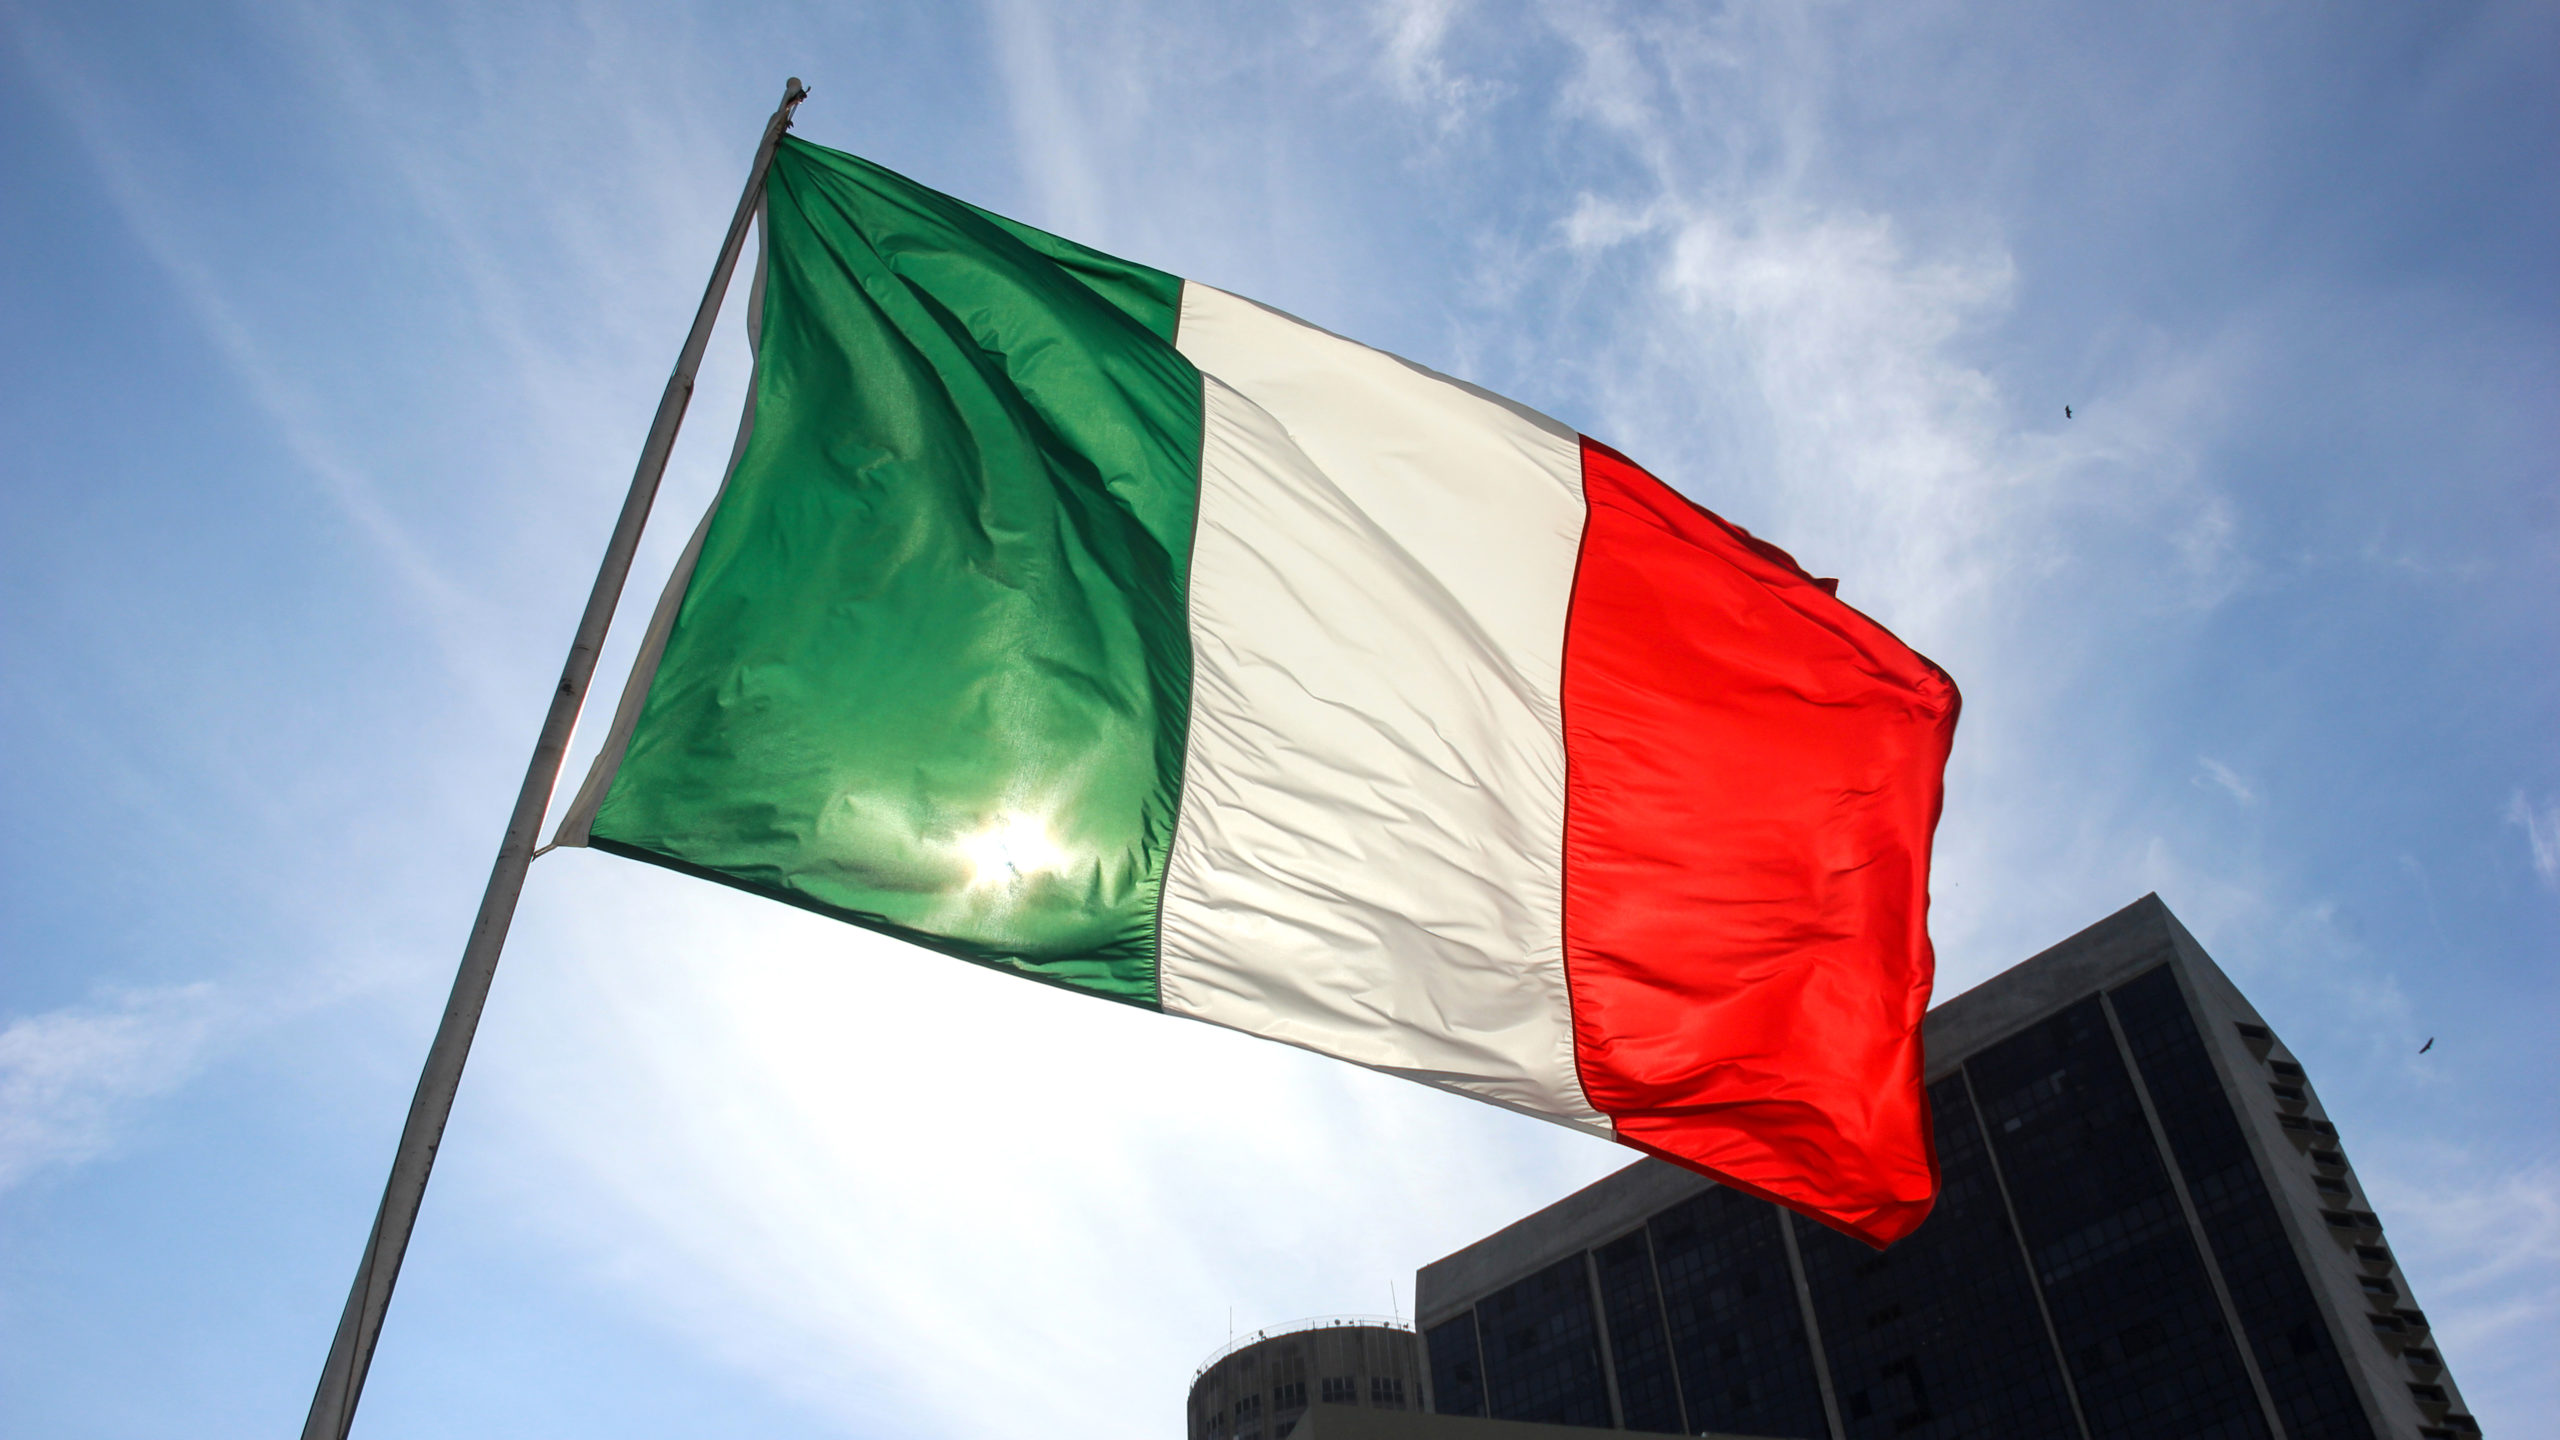 Italy Bans ChatGPT Over Data Privacy, Child Safety Concerns